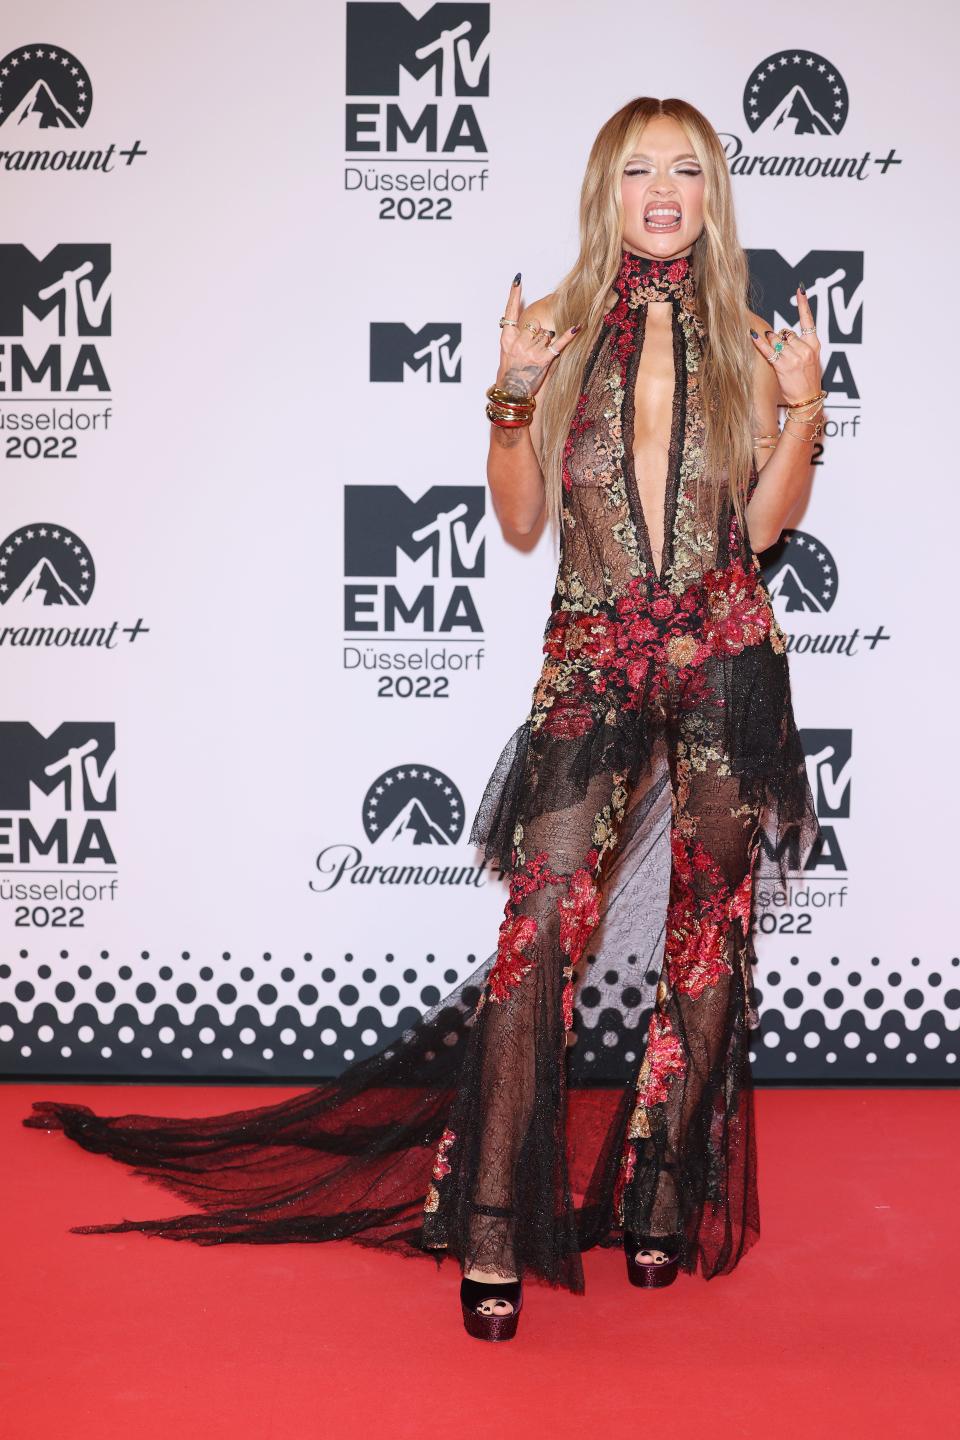 Rita Ora attends the red carpet during the MTV Europe Music Awards 2022 held at PSD Bank Dome on November 13, 2022.